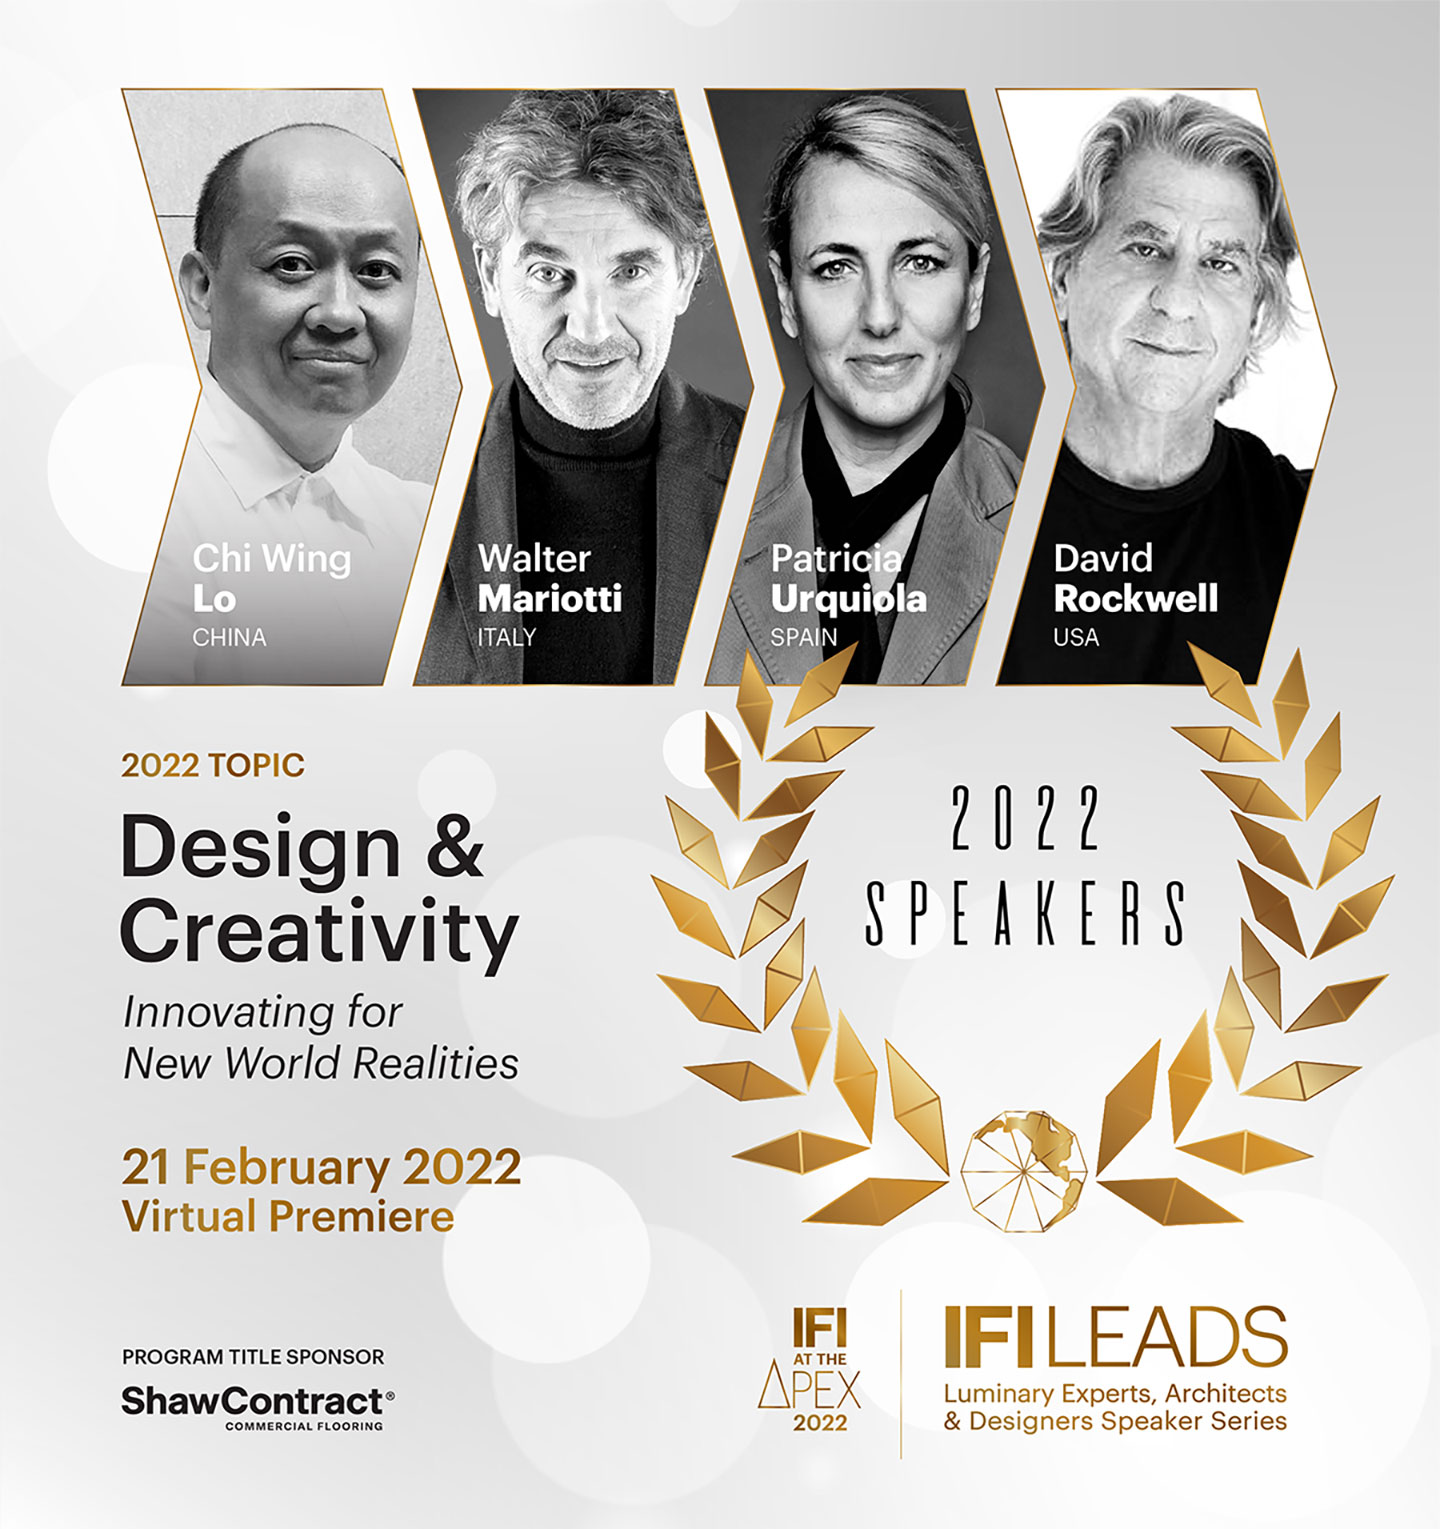 Events Ifi Launches Inaugural Ifi Leads Luminary Experts Architects